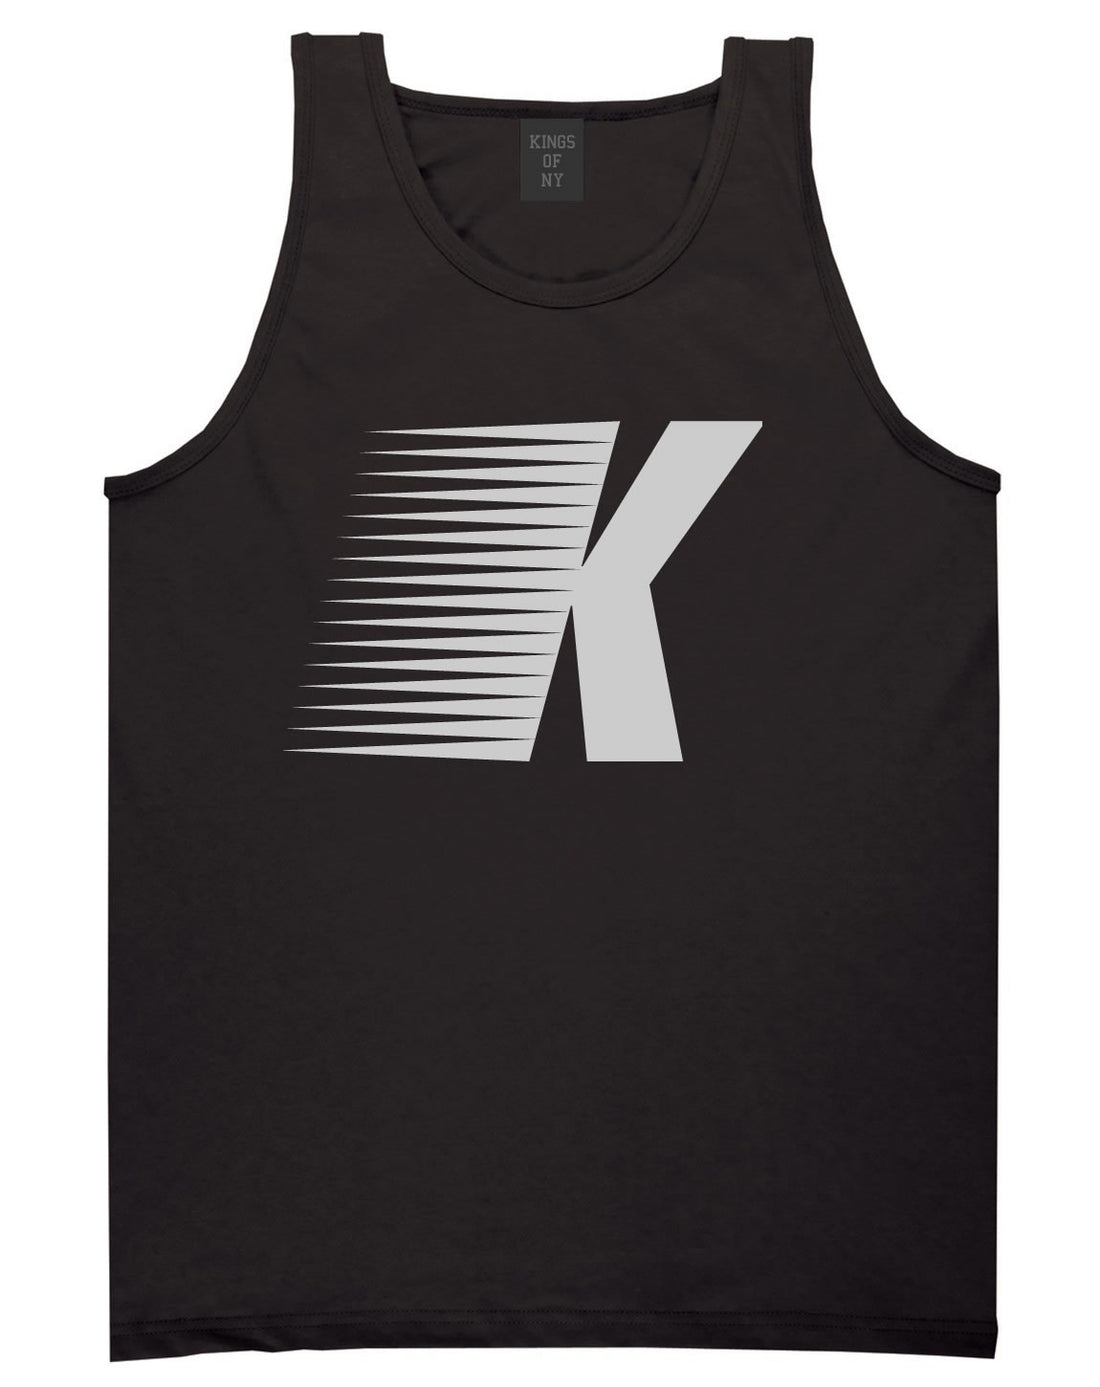 Flash K Running Fitness Style Tank Top in Black By Kings Of NY